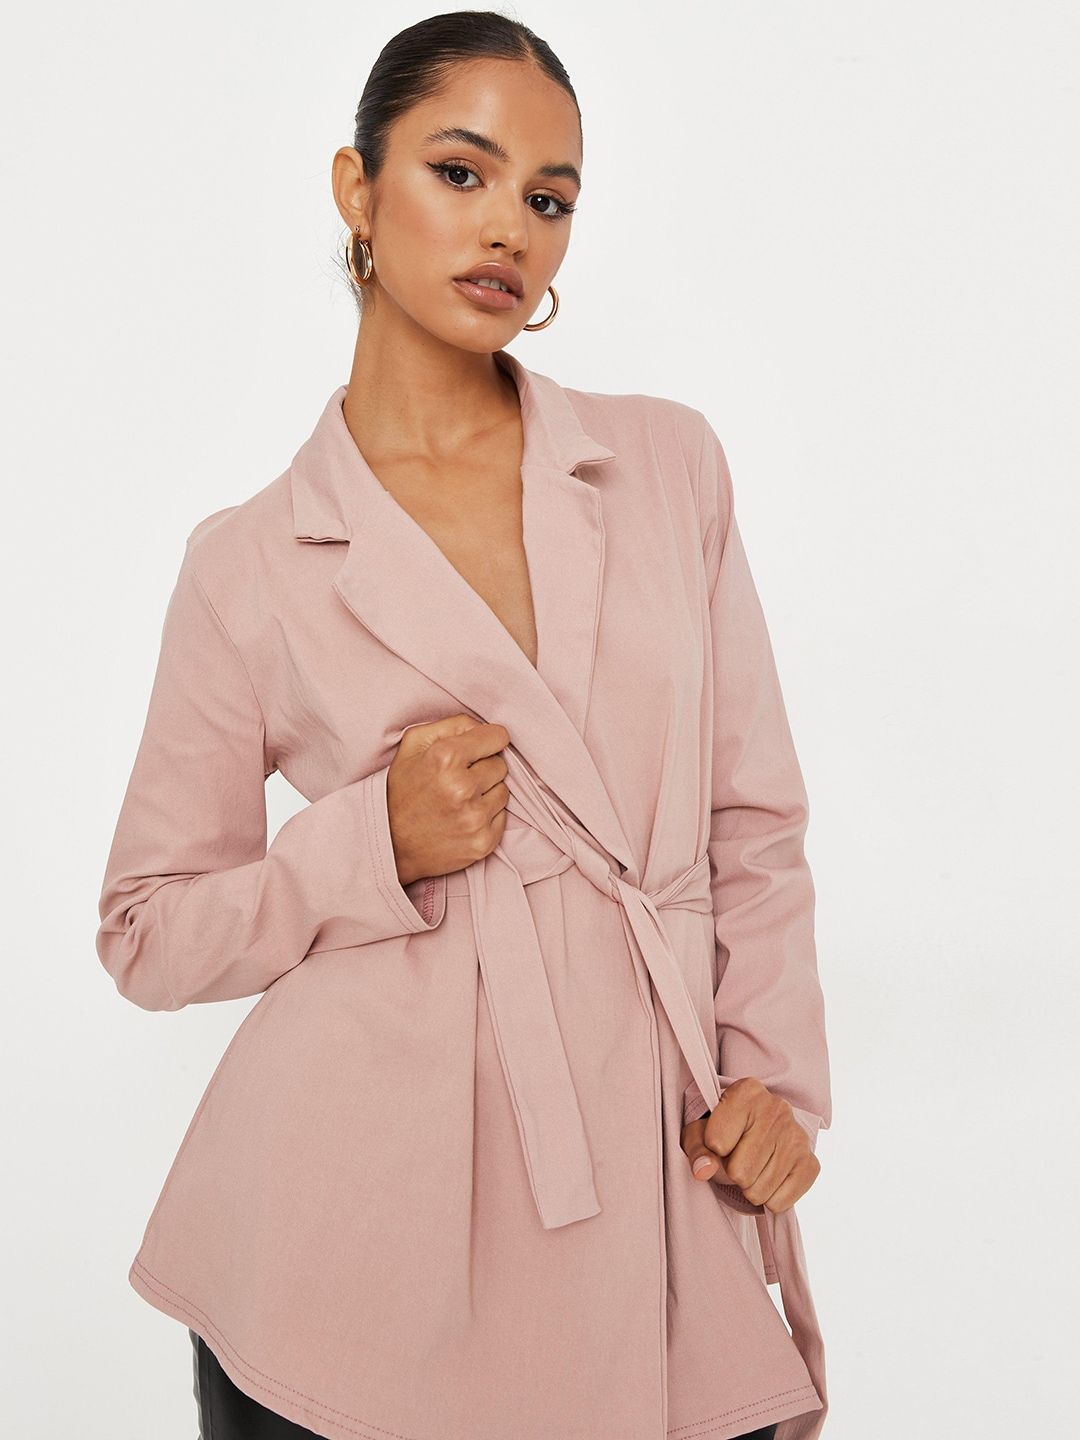 Missguided Women Pink Solid Front-Open Blazer with Belt Price in India